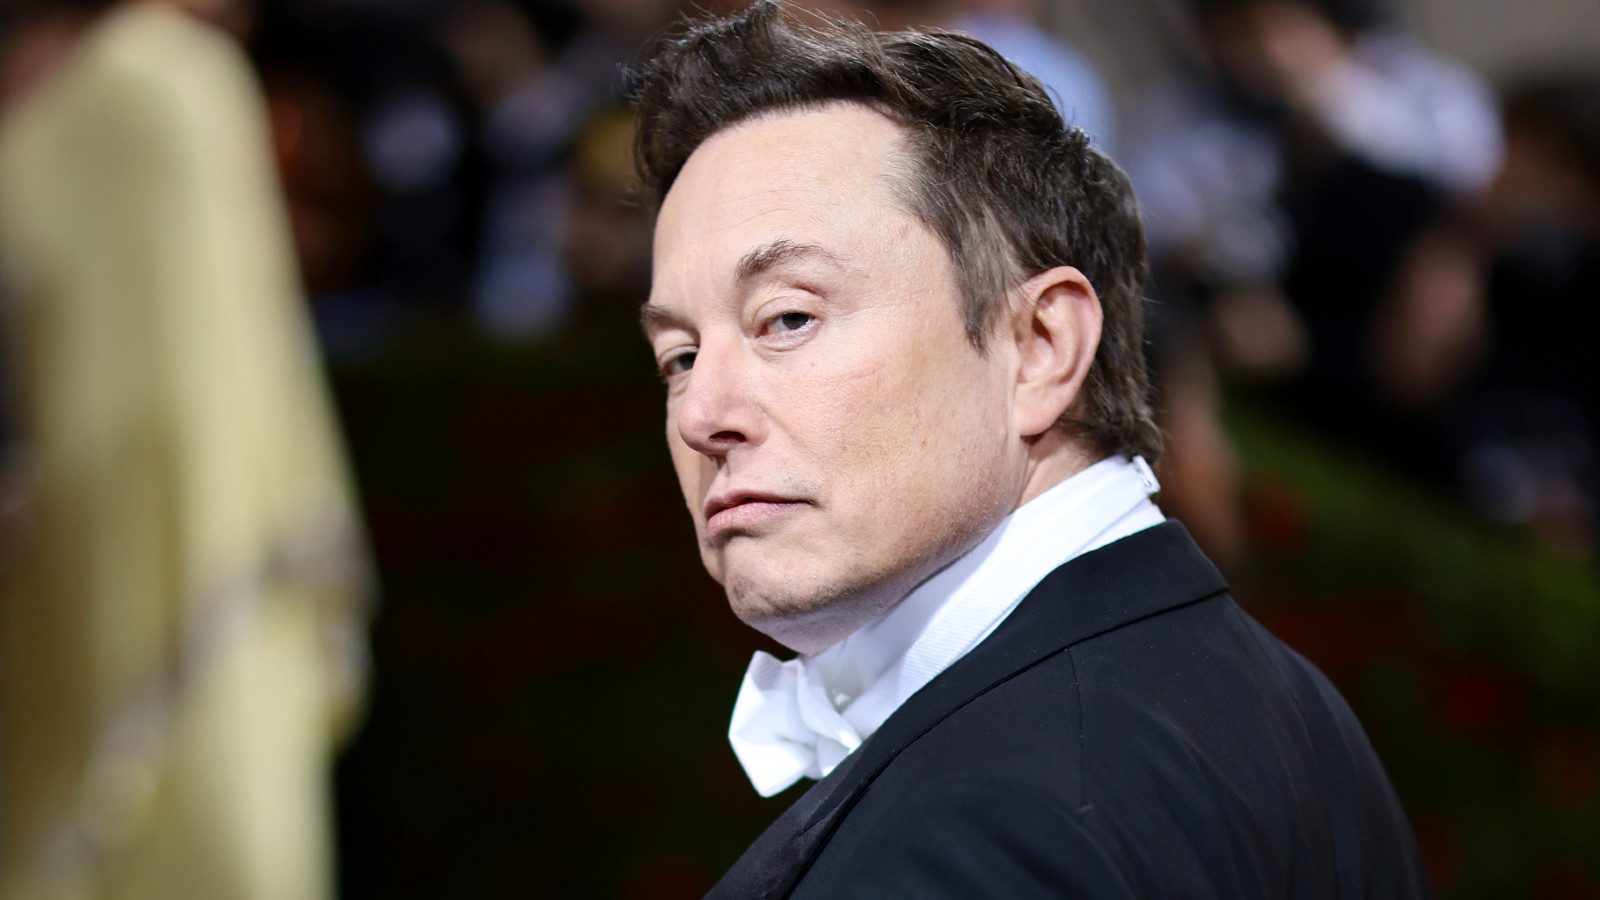 Elon Musk claims that no banned Twitter account reinstatements will happen just yet